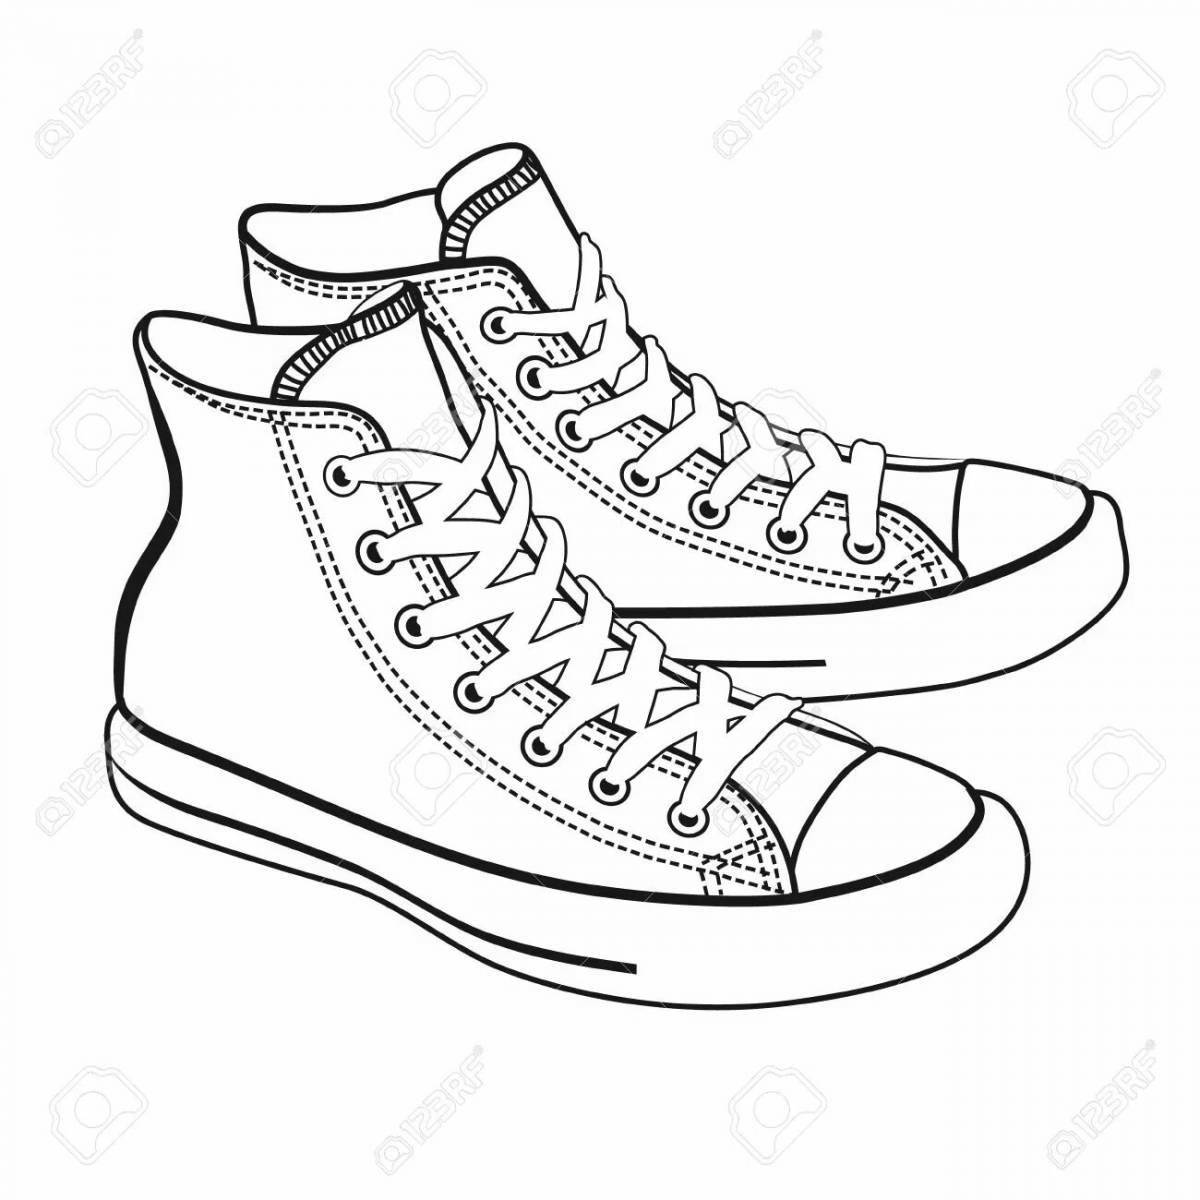 Coloring book great sneakers for kids